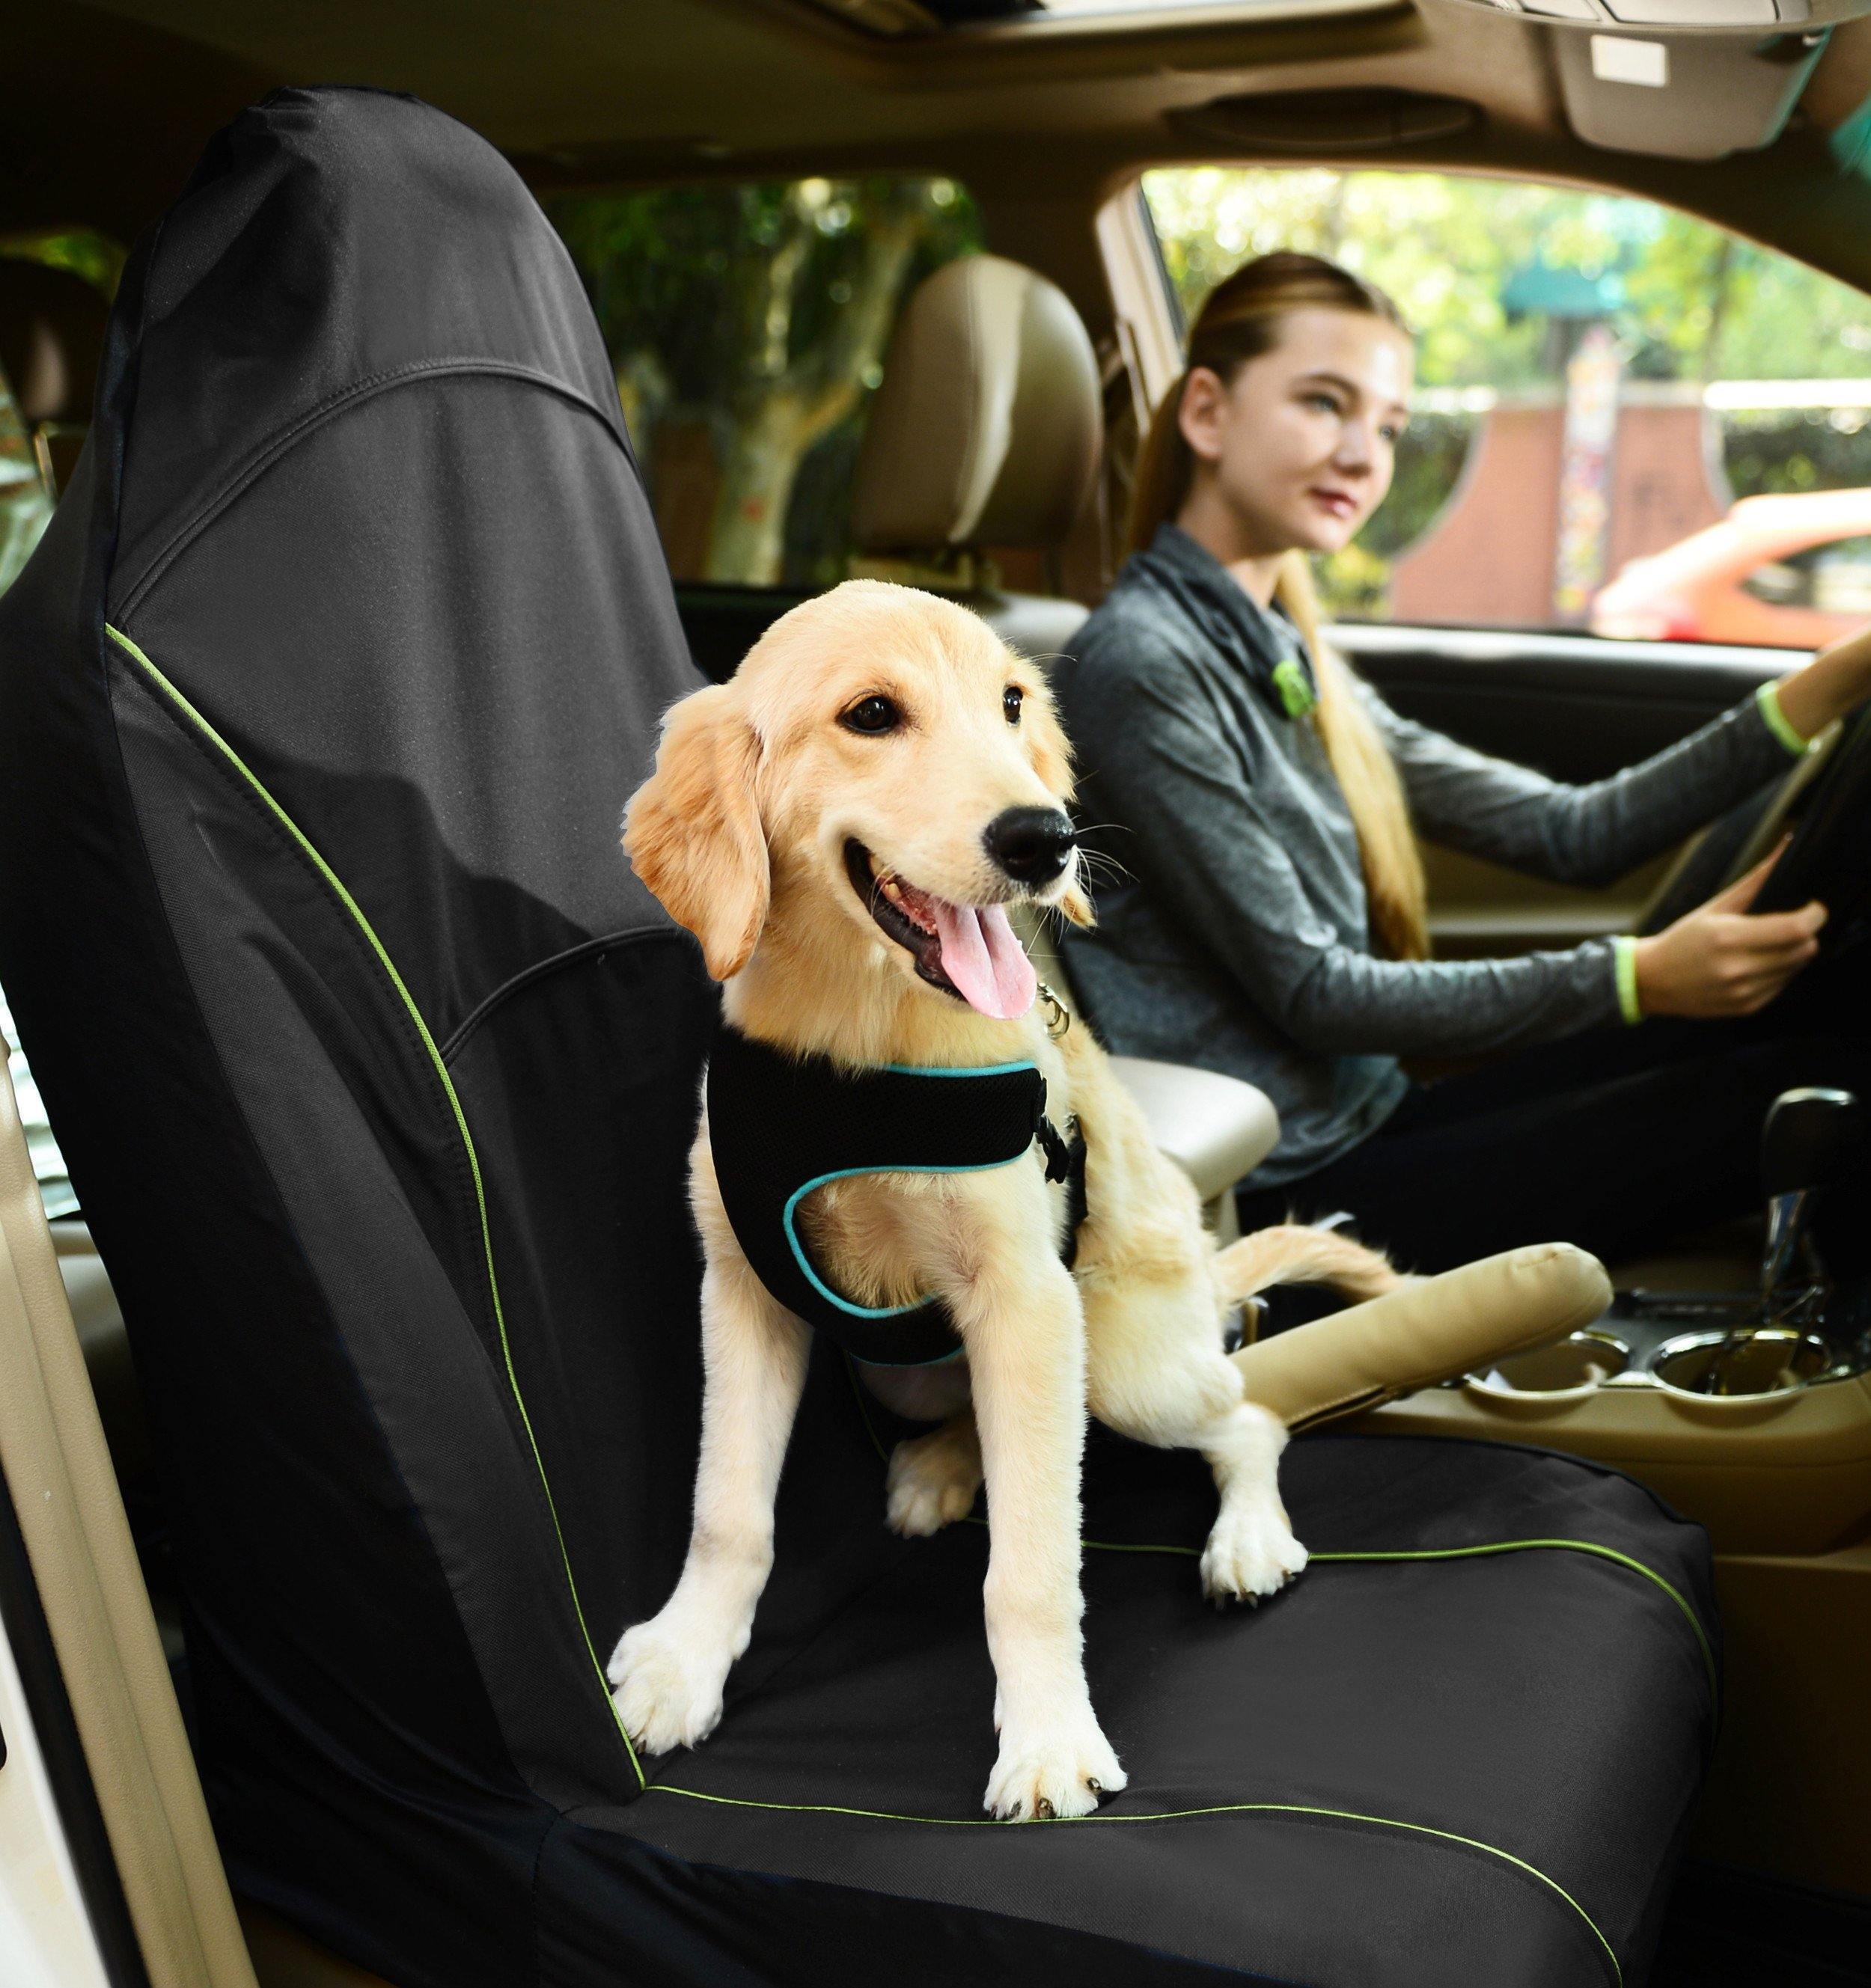 Pet Life ® 'Open Road' Single Seated Safety Child Pet Cat Dog Car Seat Carseat Cover Protector Black 